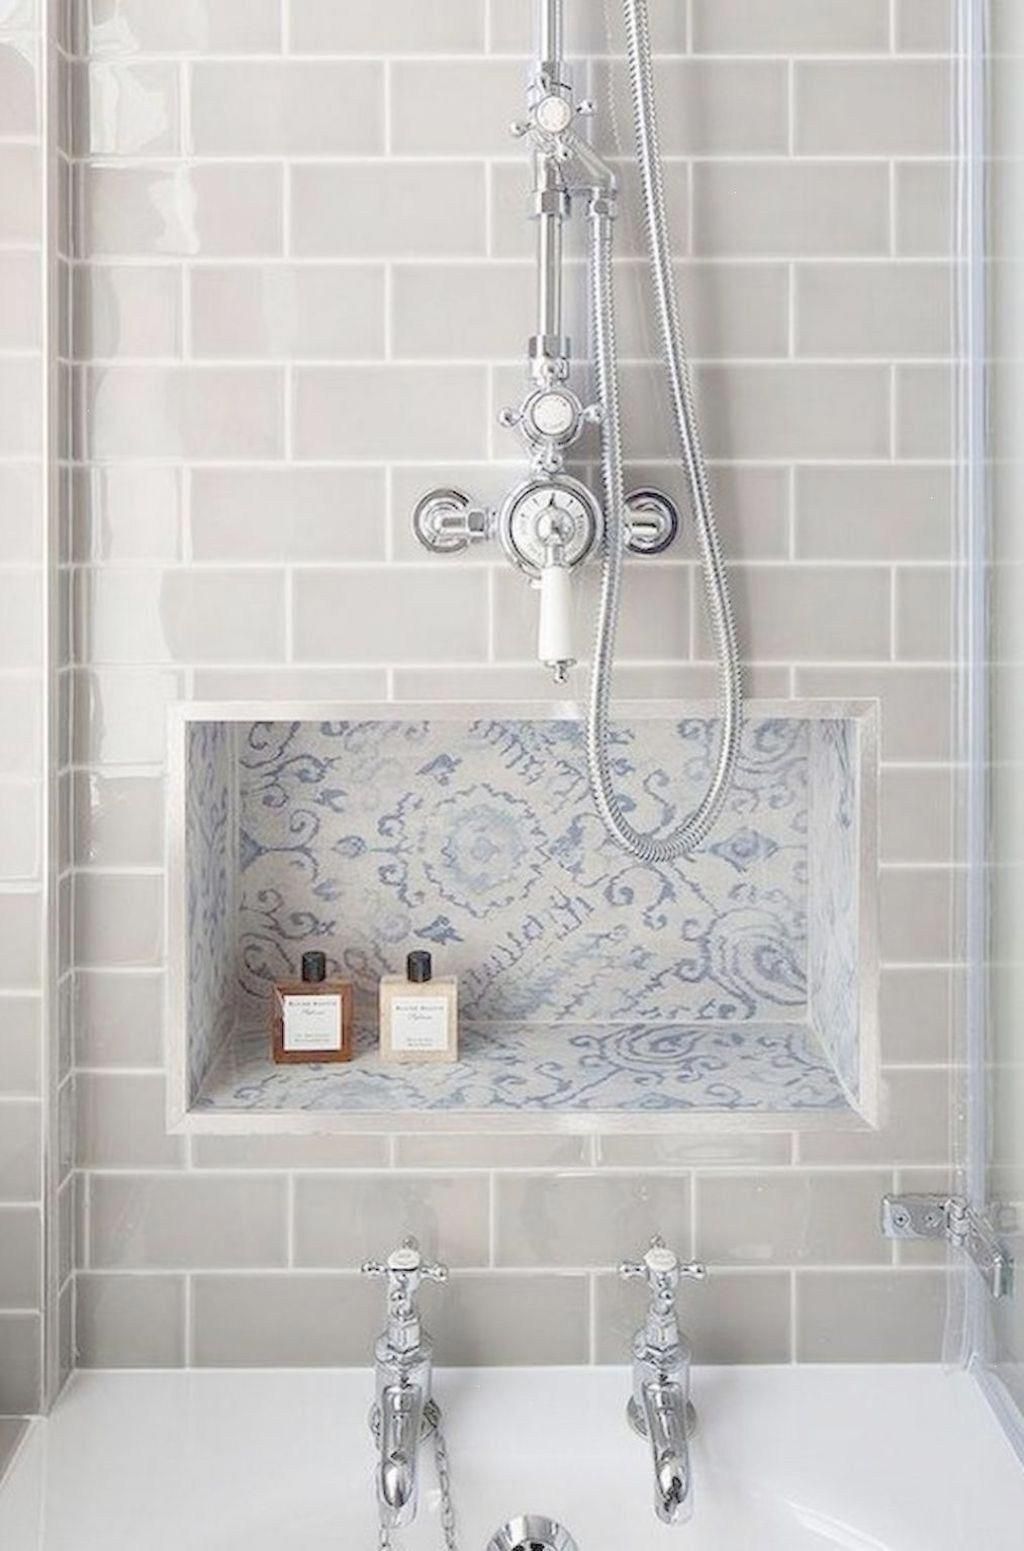 Review this short article today which discusses Ideas for Bathroom Decor